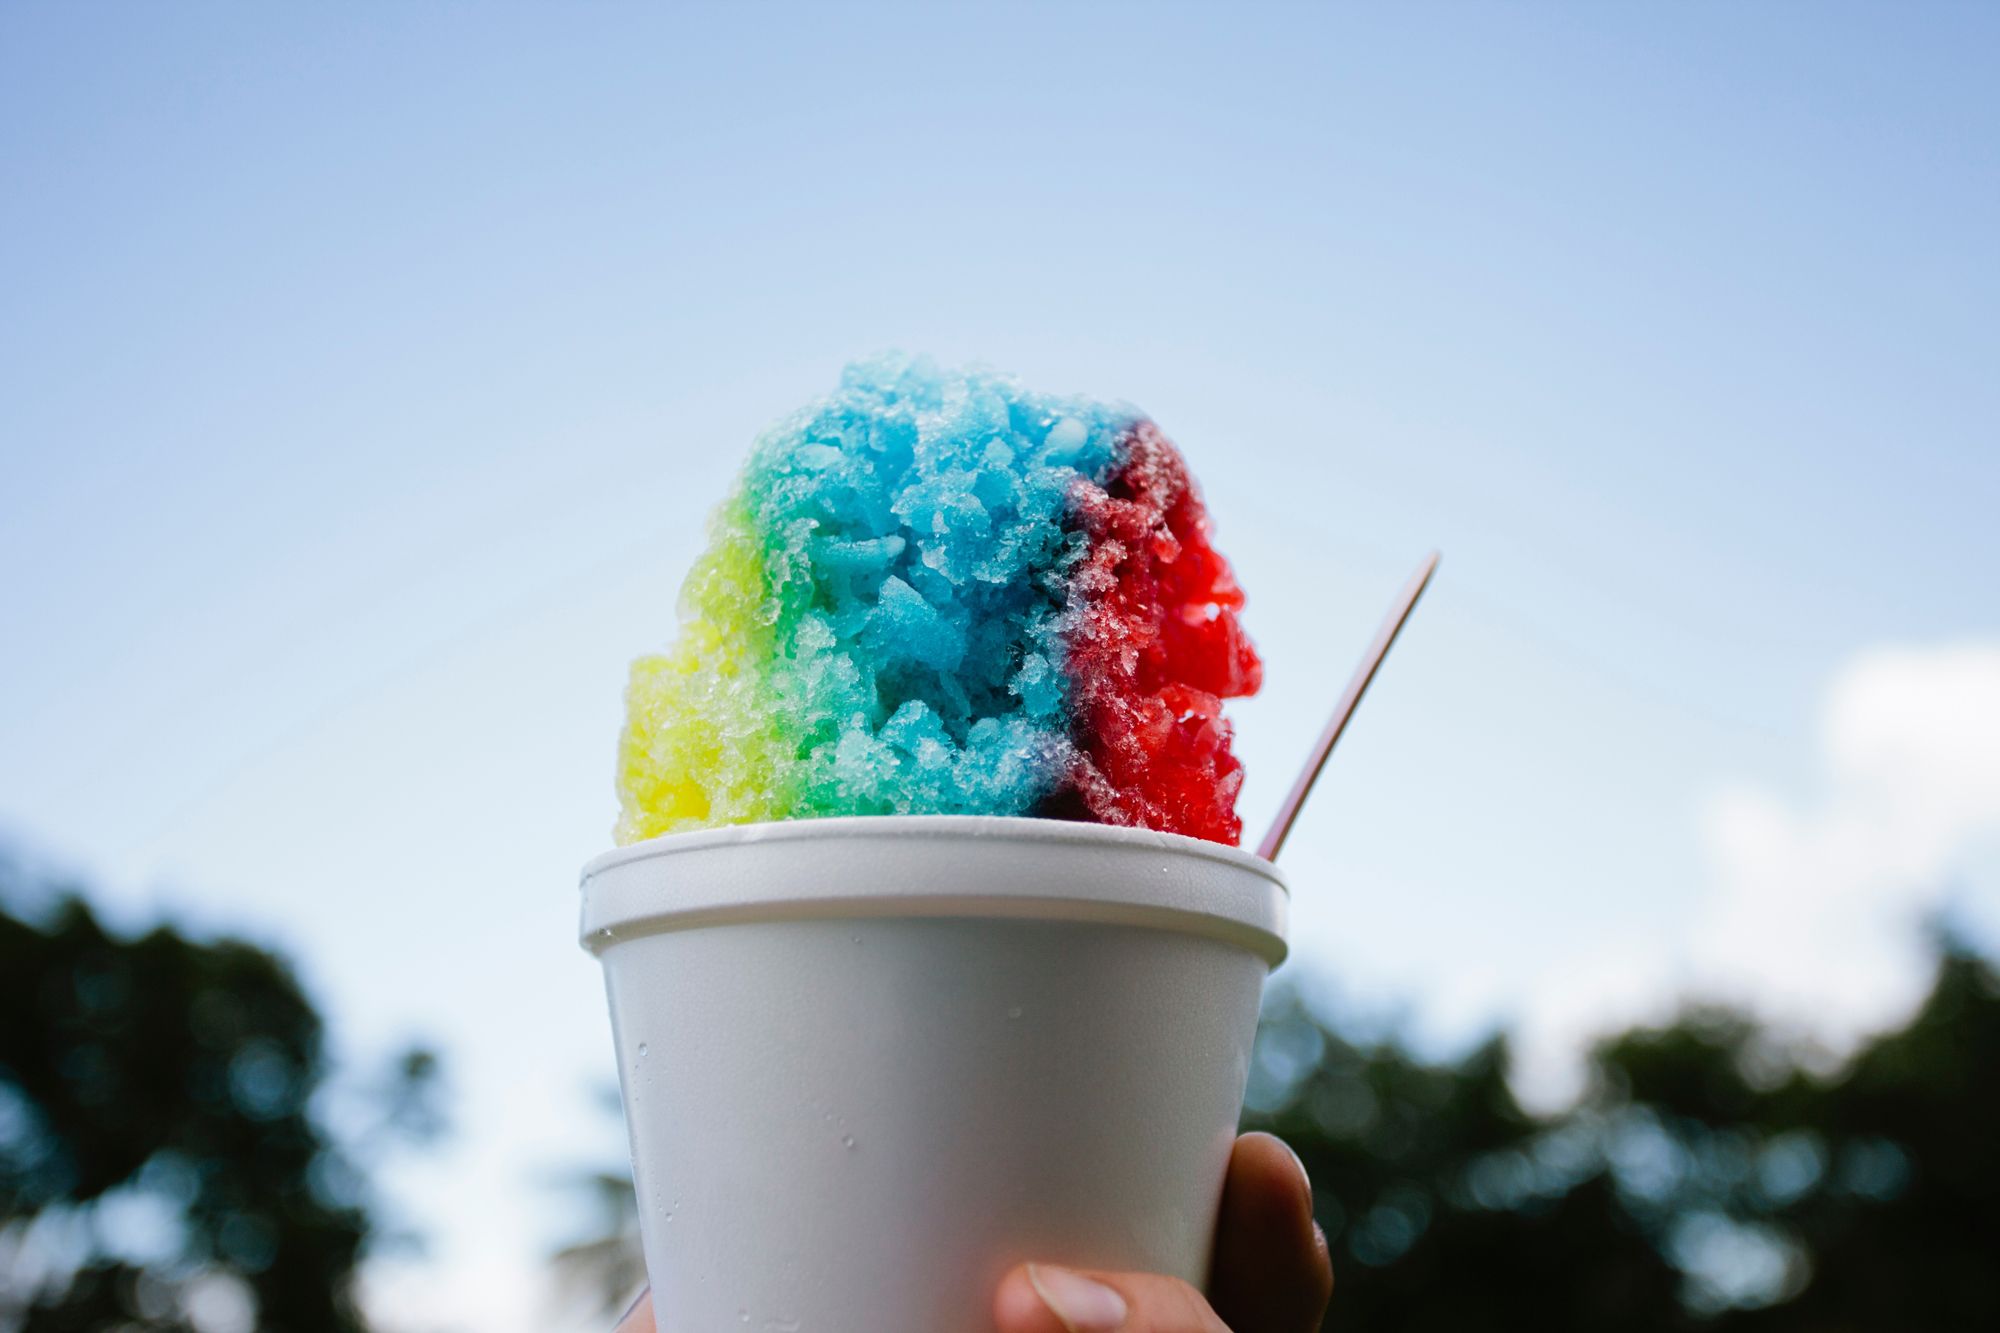 10 Best Snow Cone Makers in 2021 - Shaved Ice Machine Reviews